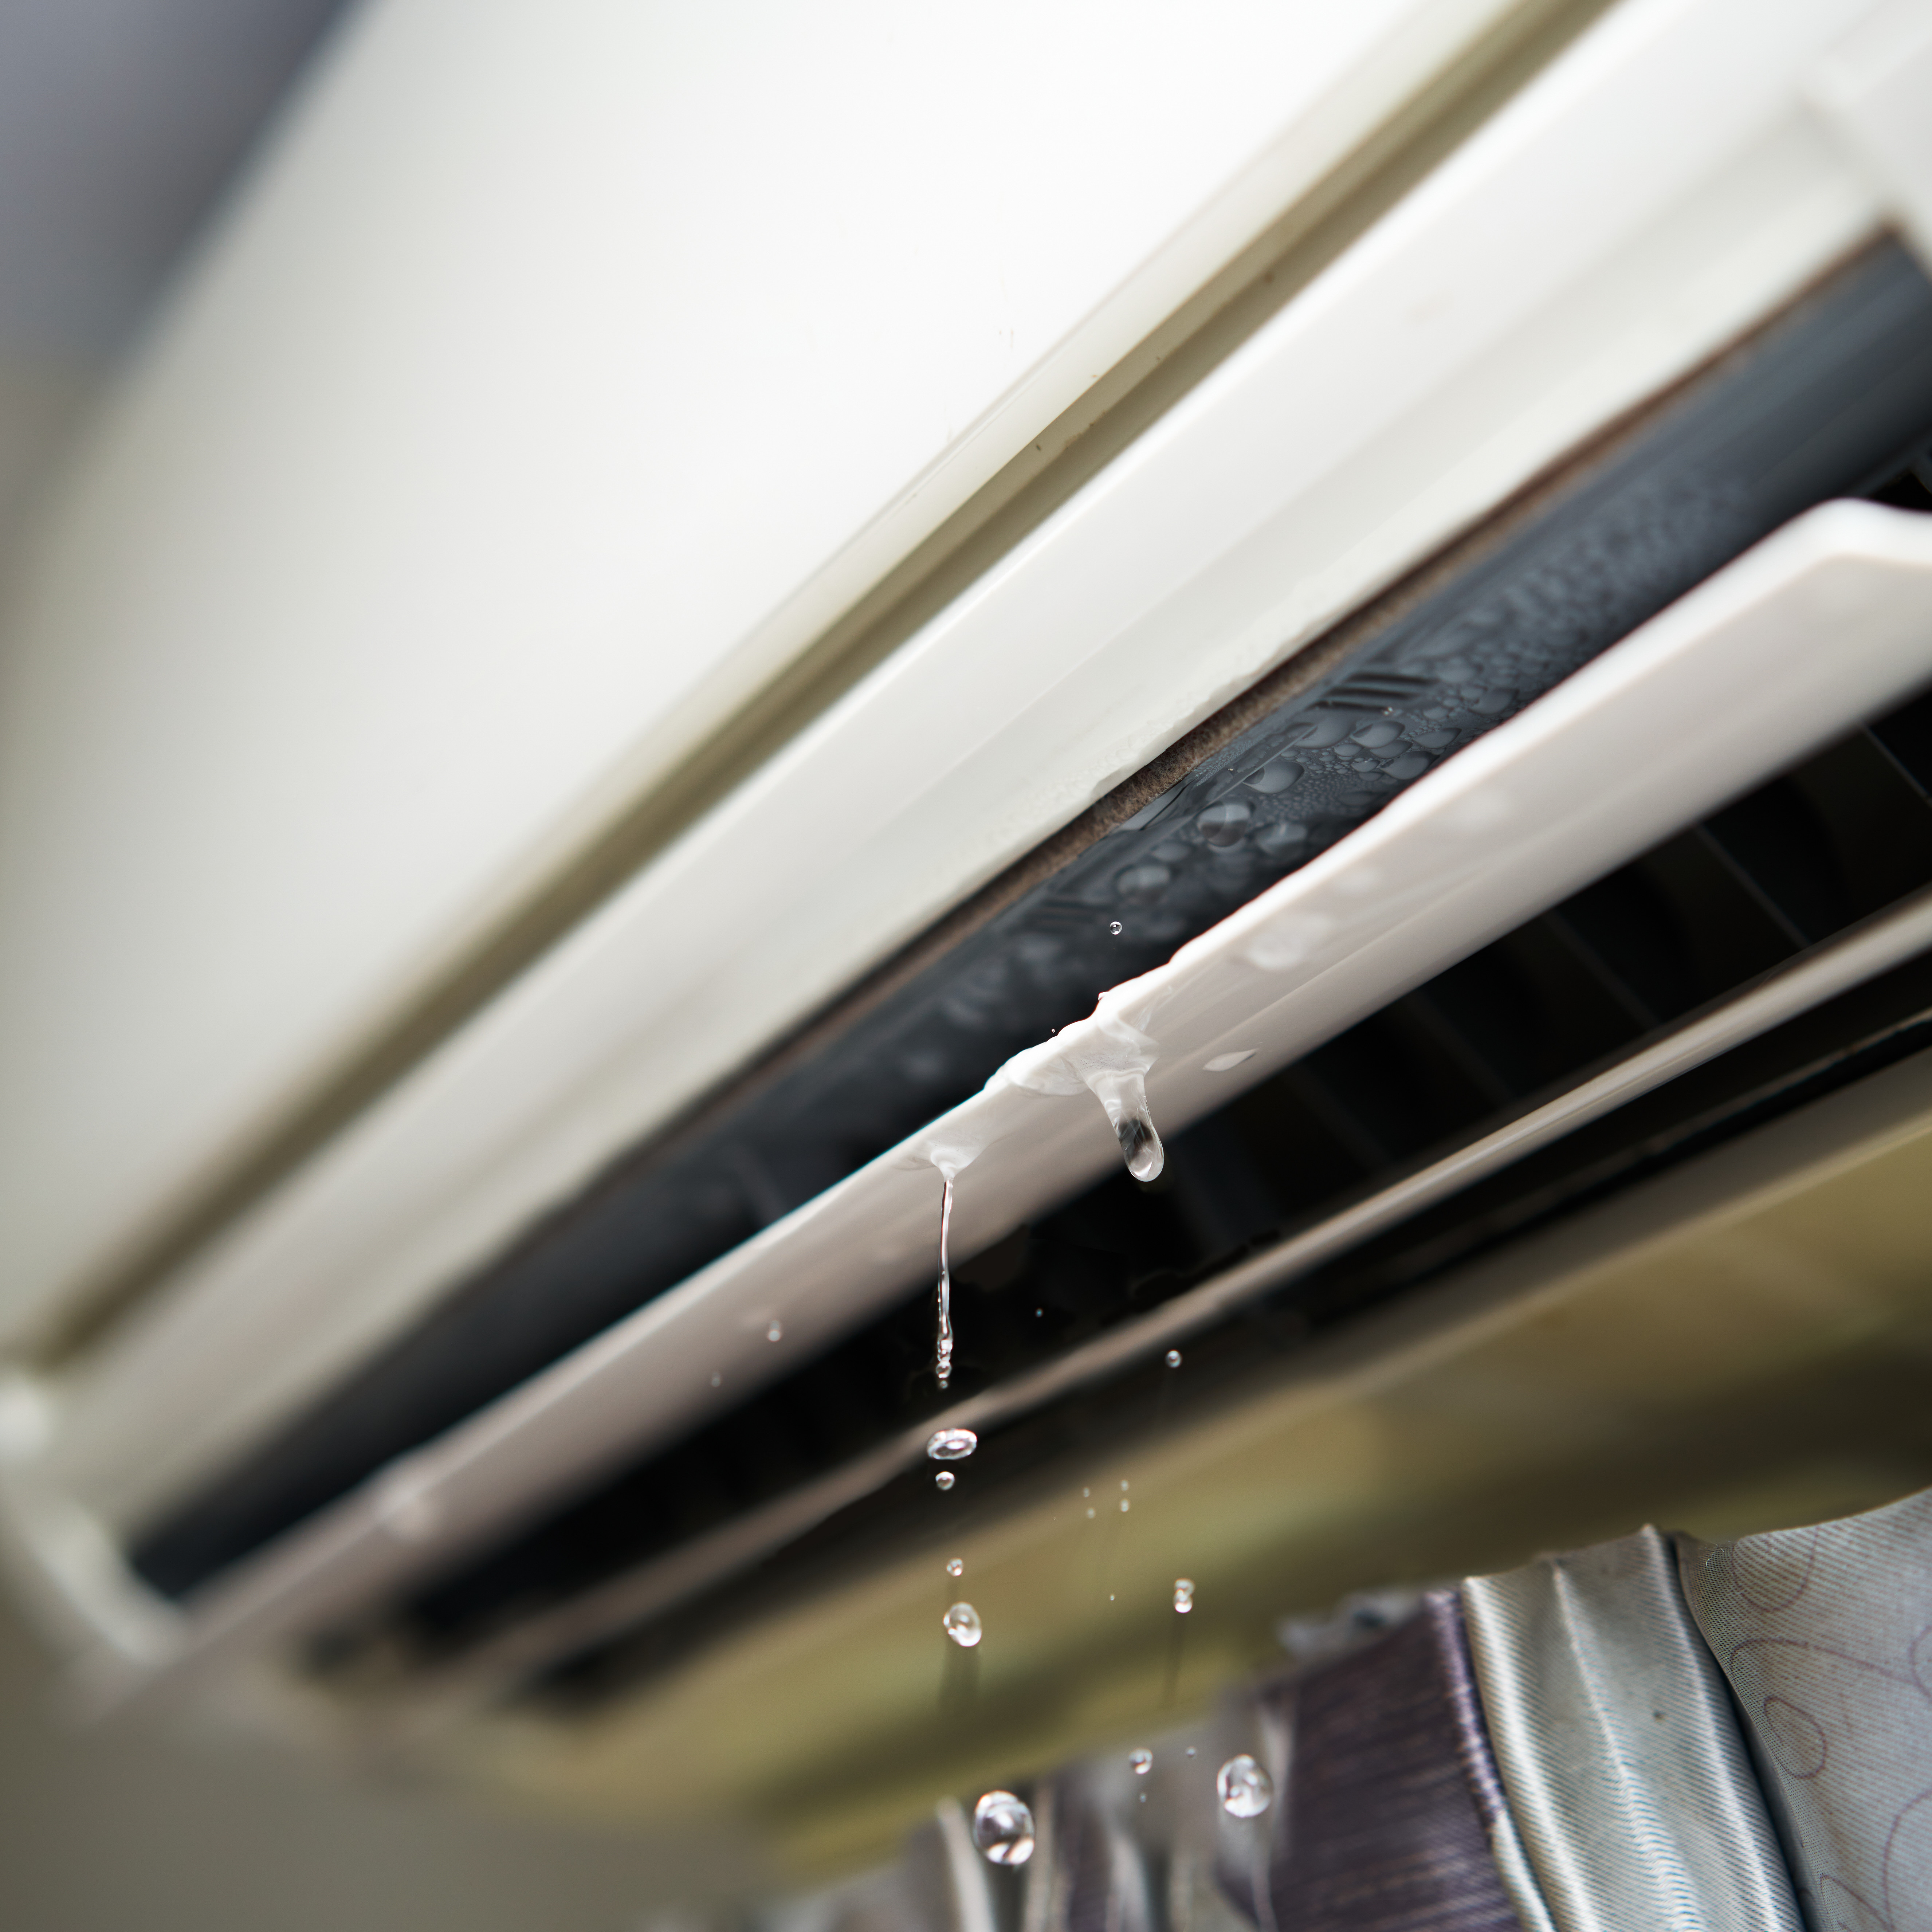 Water leaking from the air conditioner